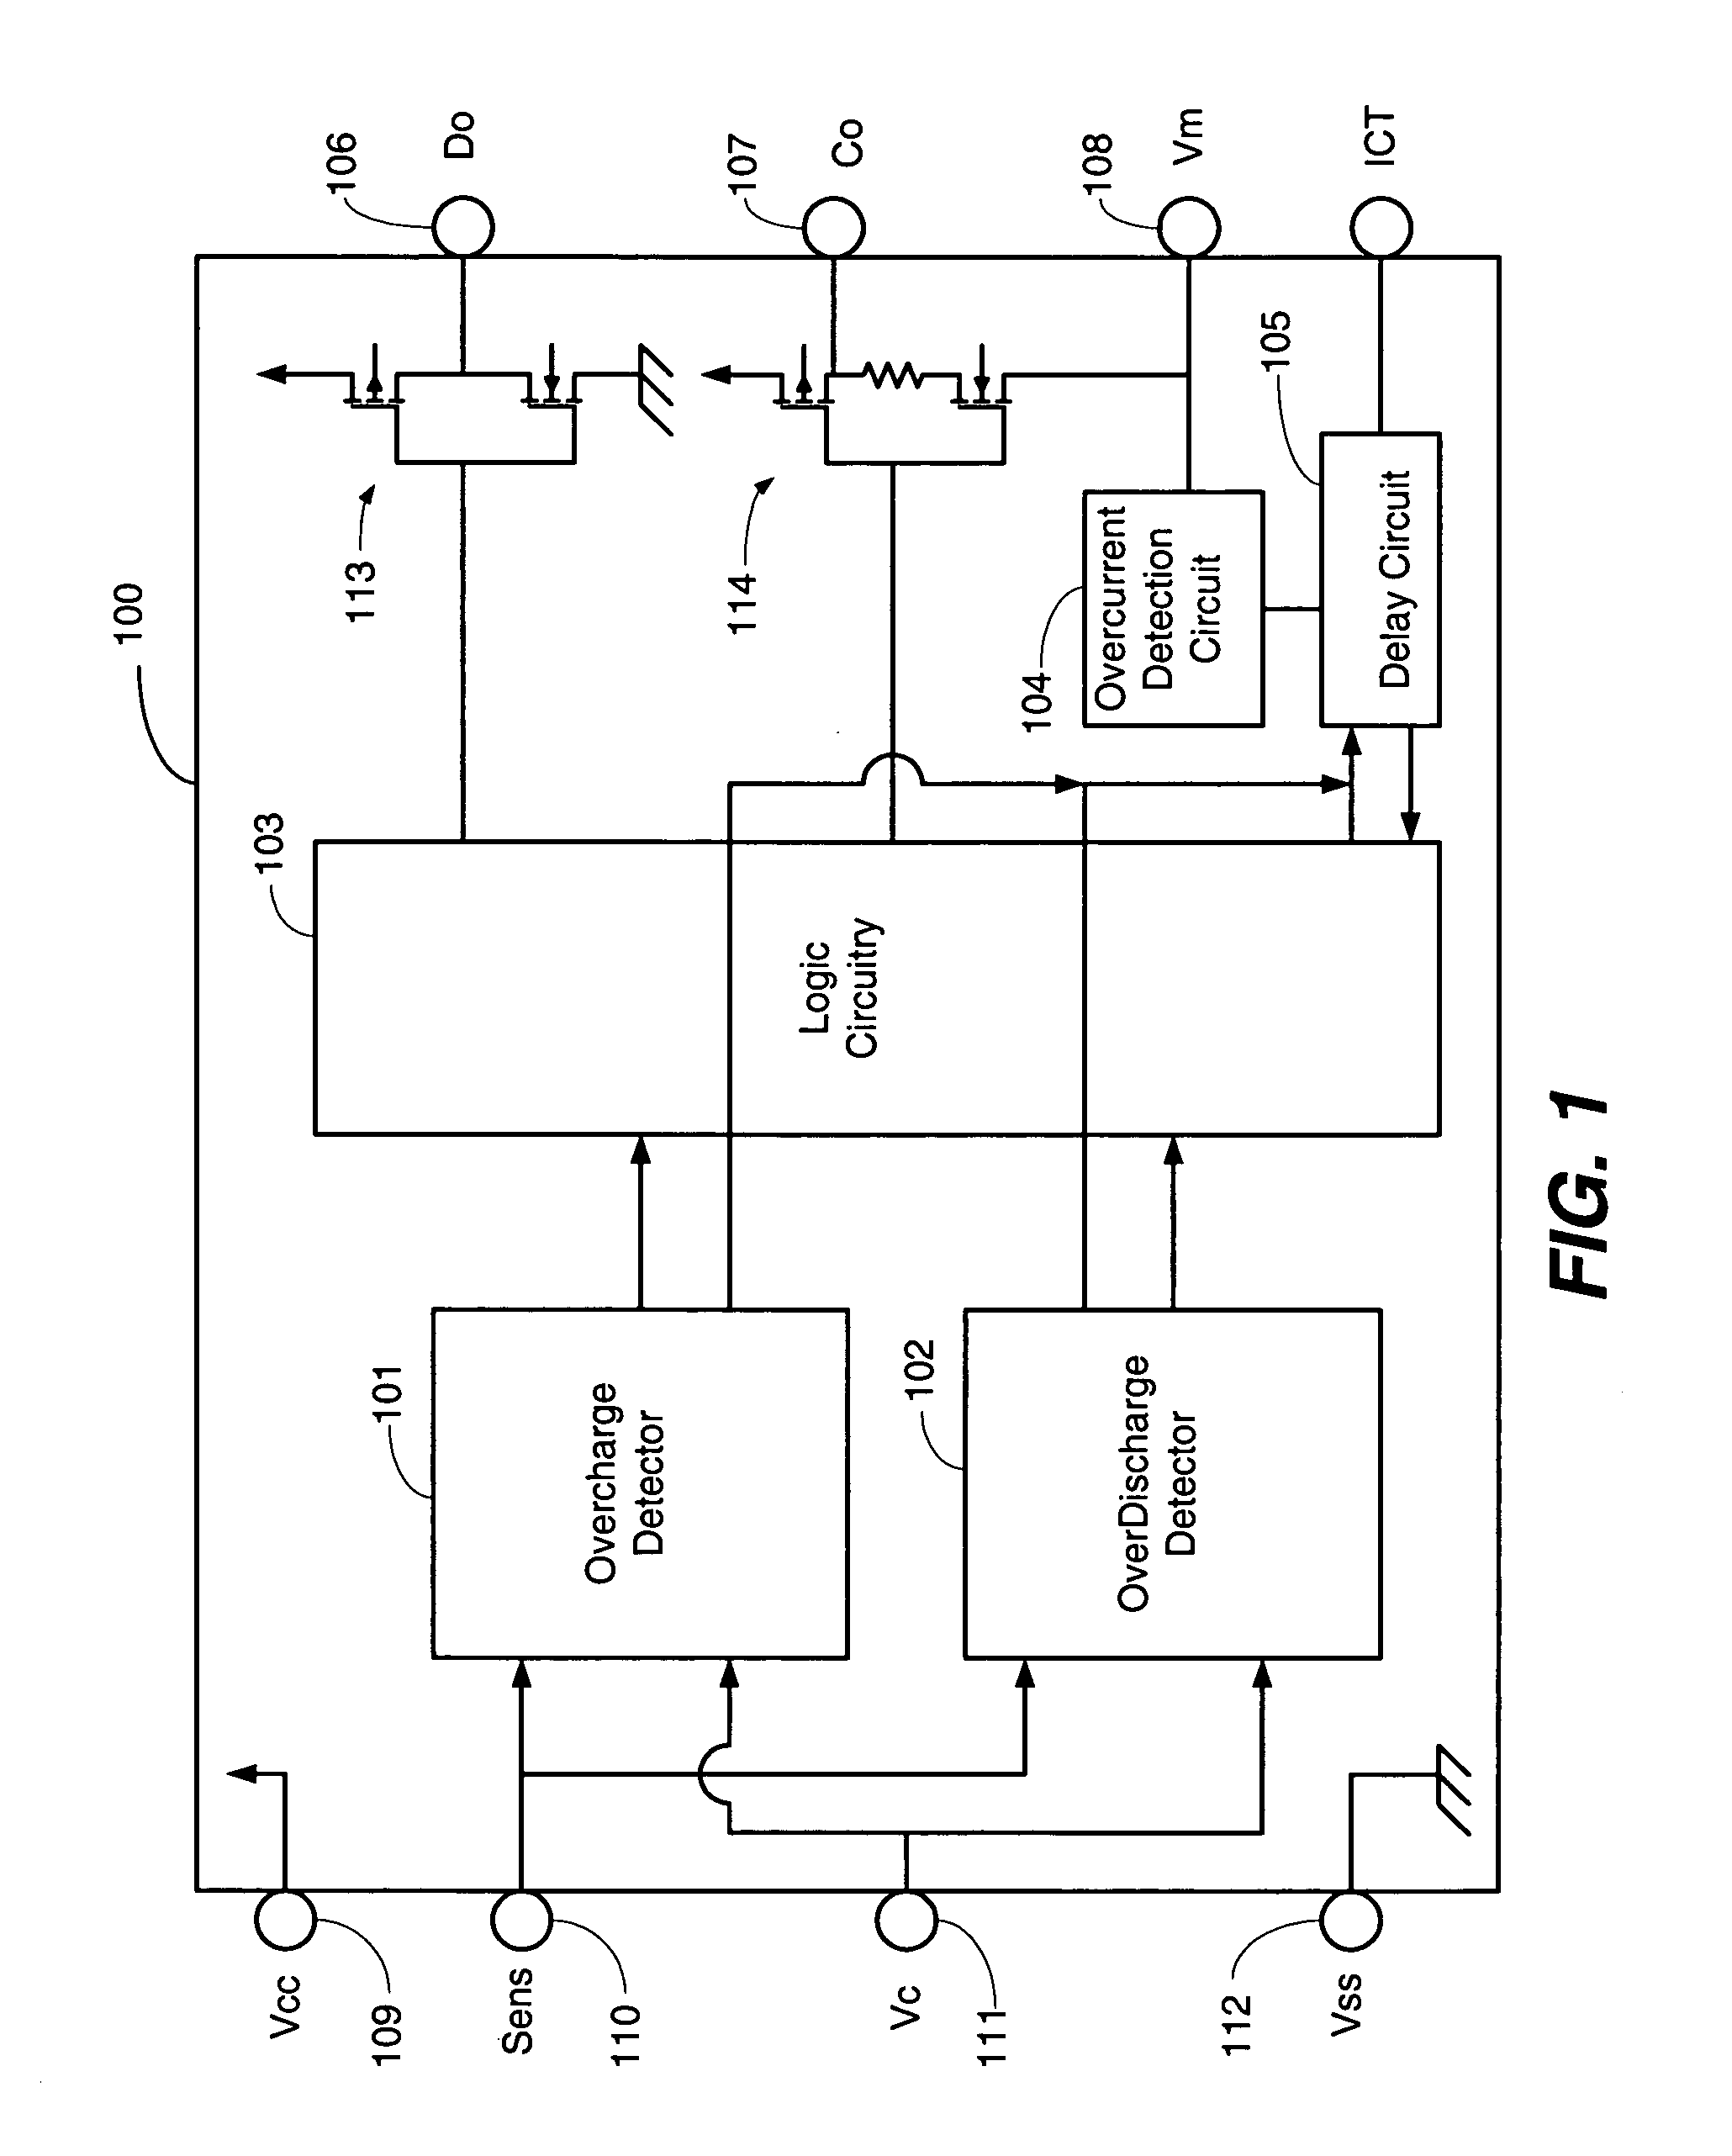 Battery protection circuit for simulating an overcurrent condition based on battery current flow